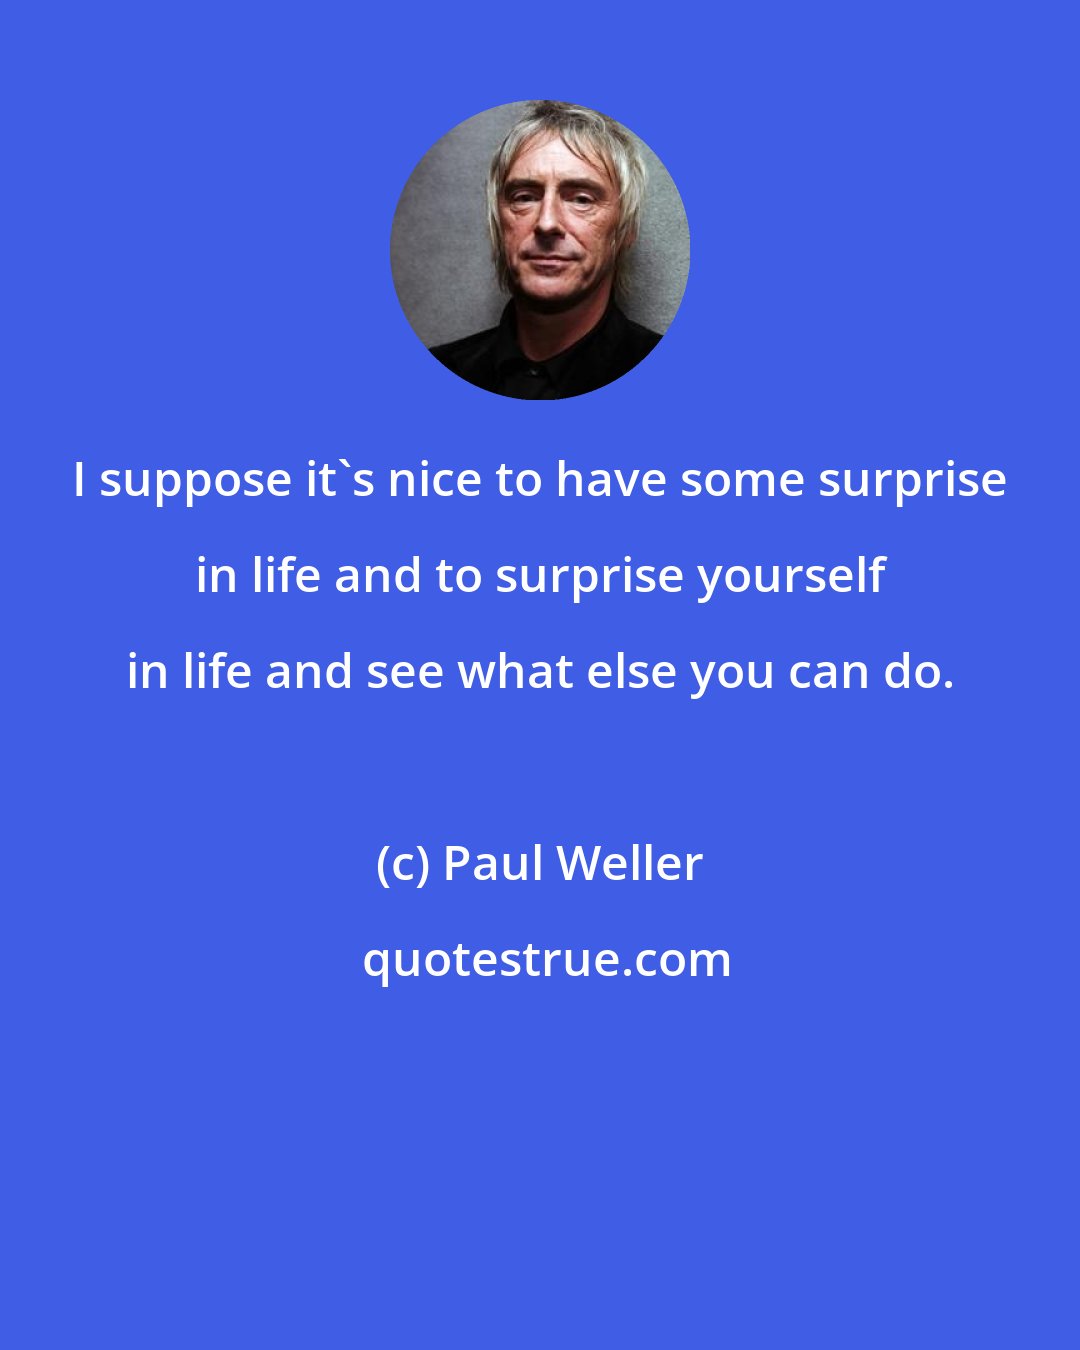 Paul Weller: I suppose it's nice to have some surprise in life and to surprise yourself in life and see what else you can do.